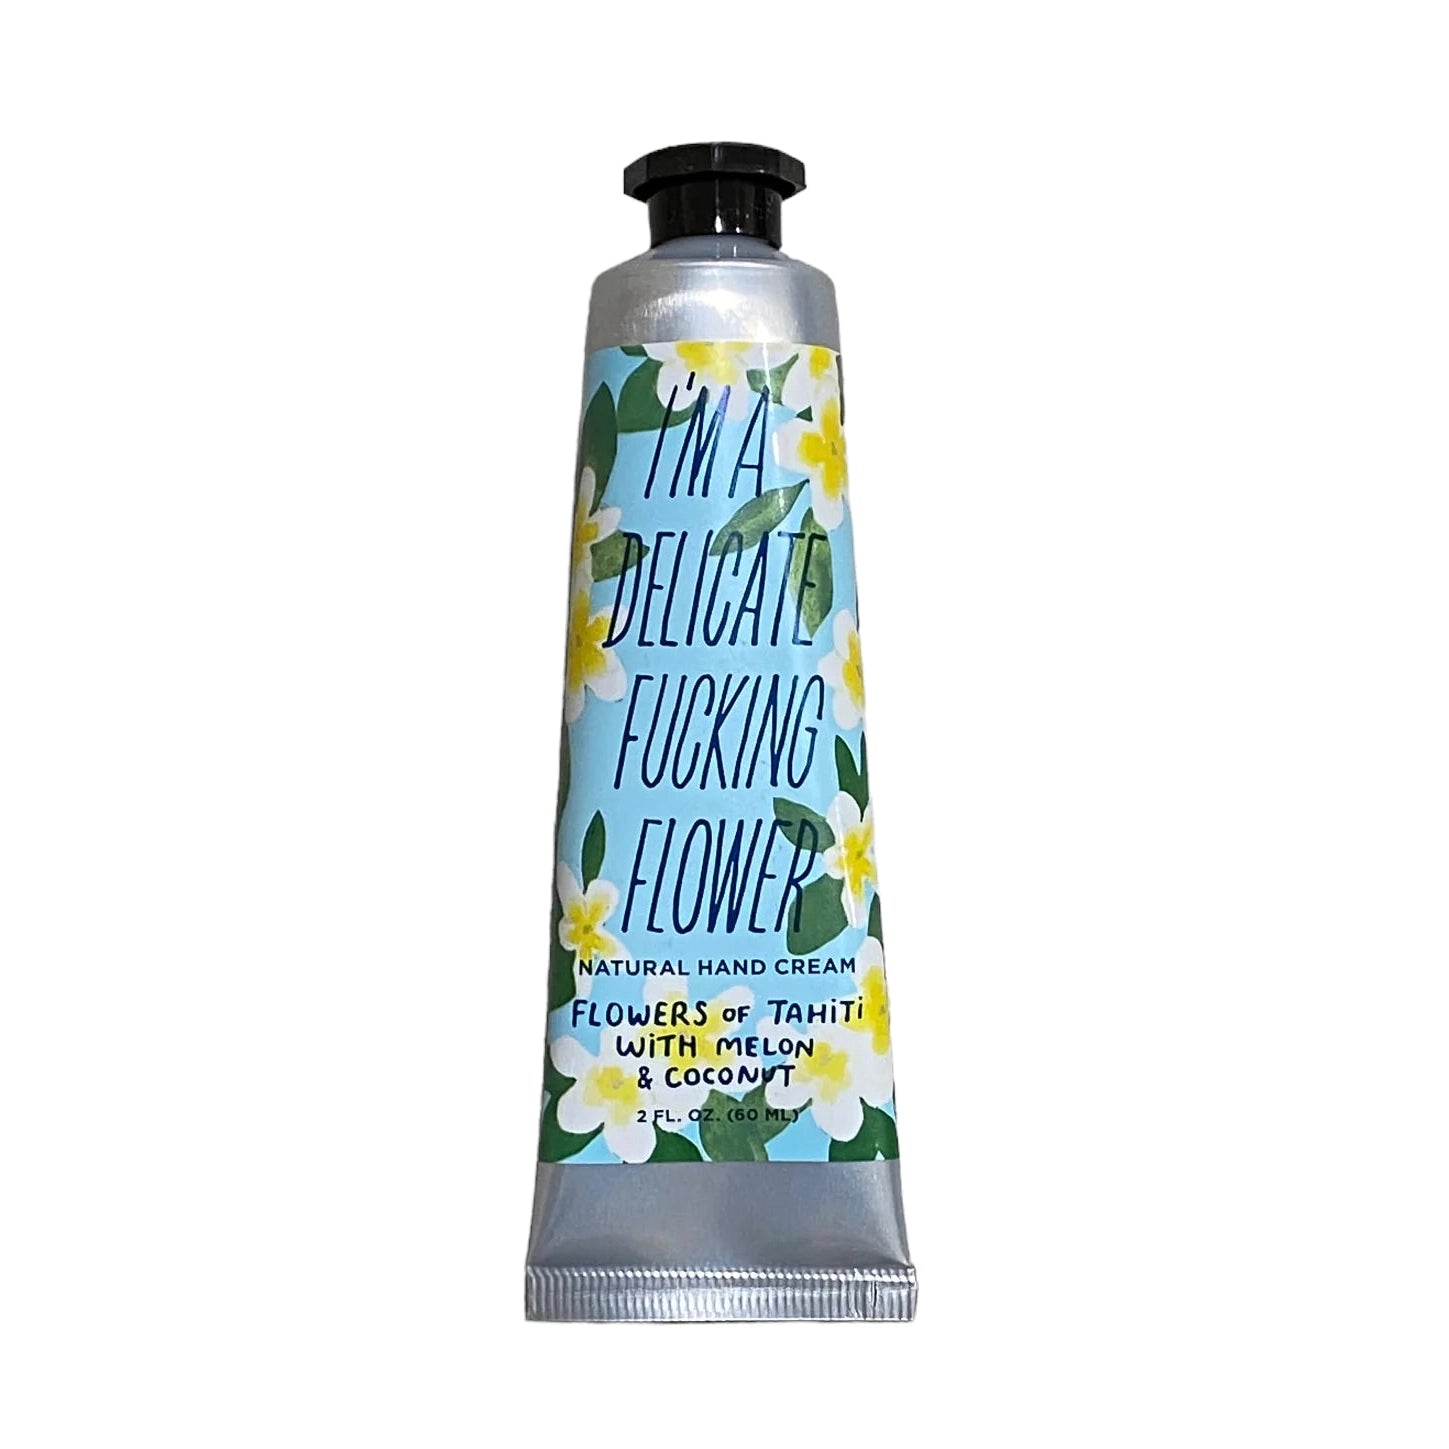 I'M A DELICATE F*CKING FLOWER HAND CREAM - FLOWERS OF TAHITI WITH MELON & COCONUT-Self Care-BLUE Q-Coriander